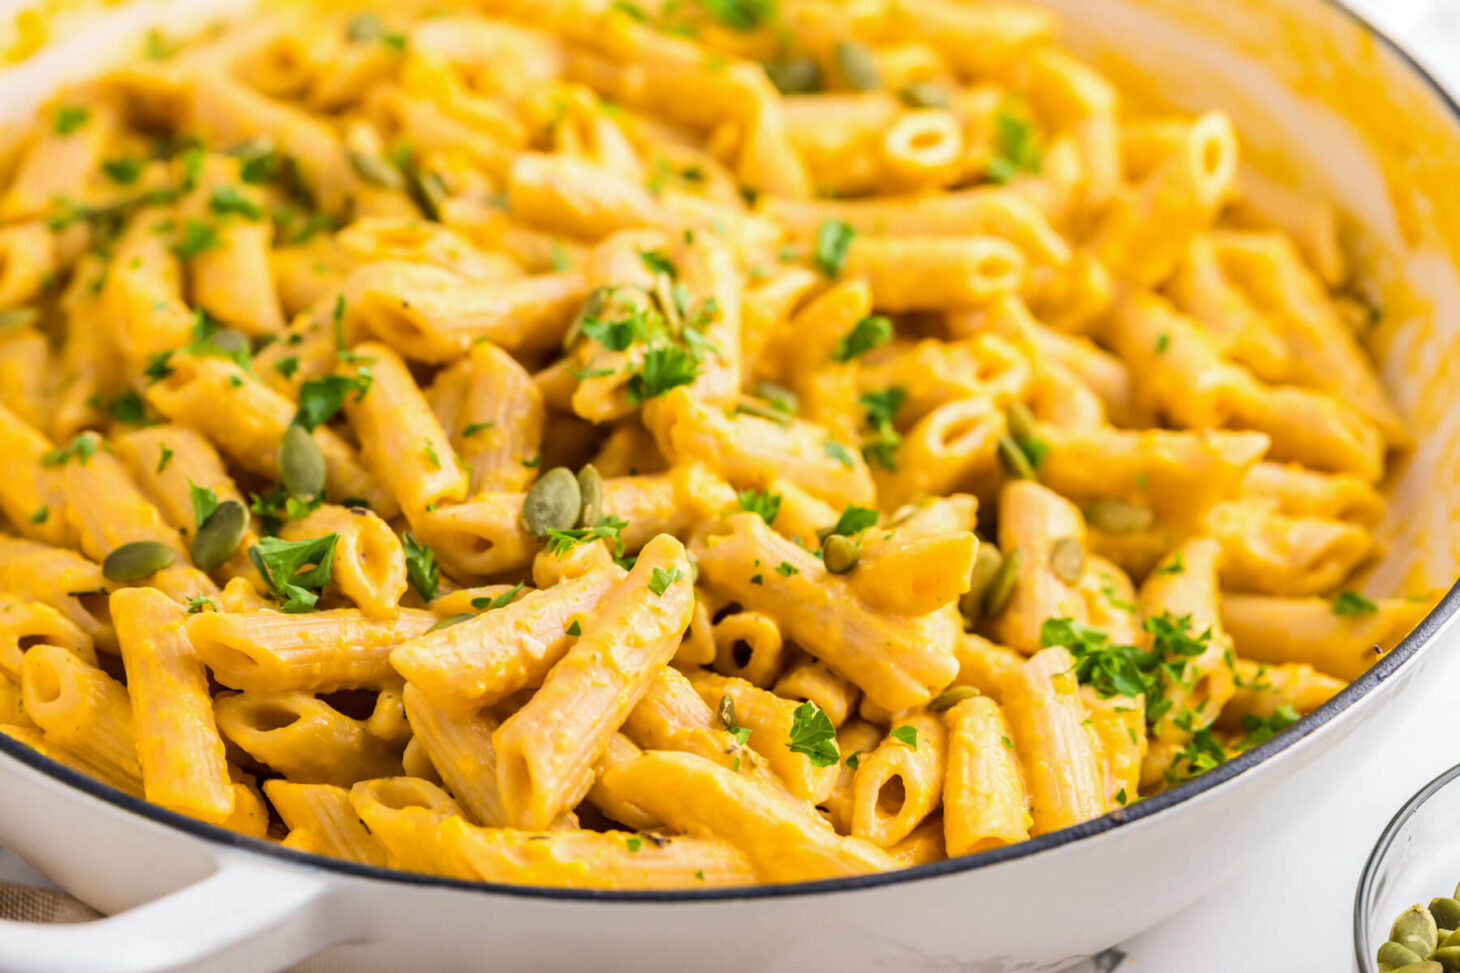 A white enameled pan filled with penne in a creamy pumpkin pasta sauce.